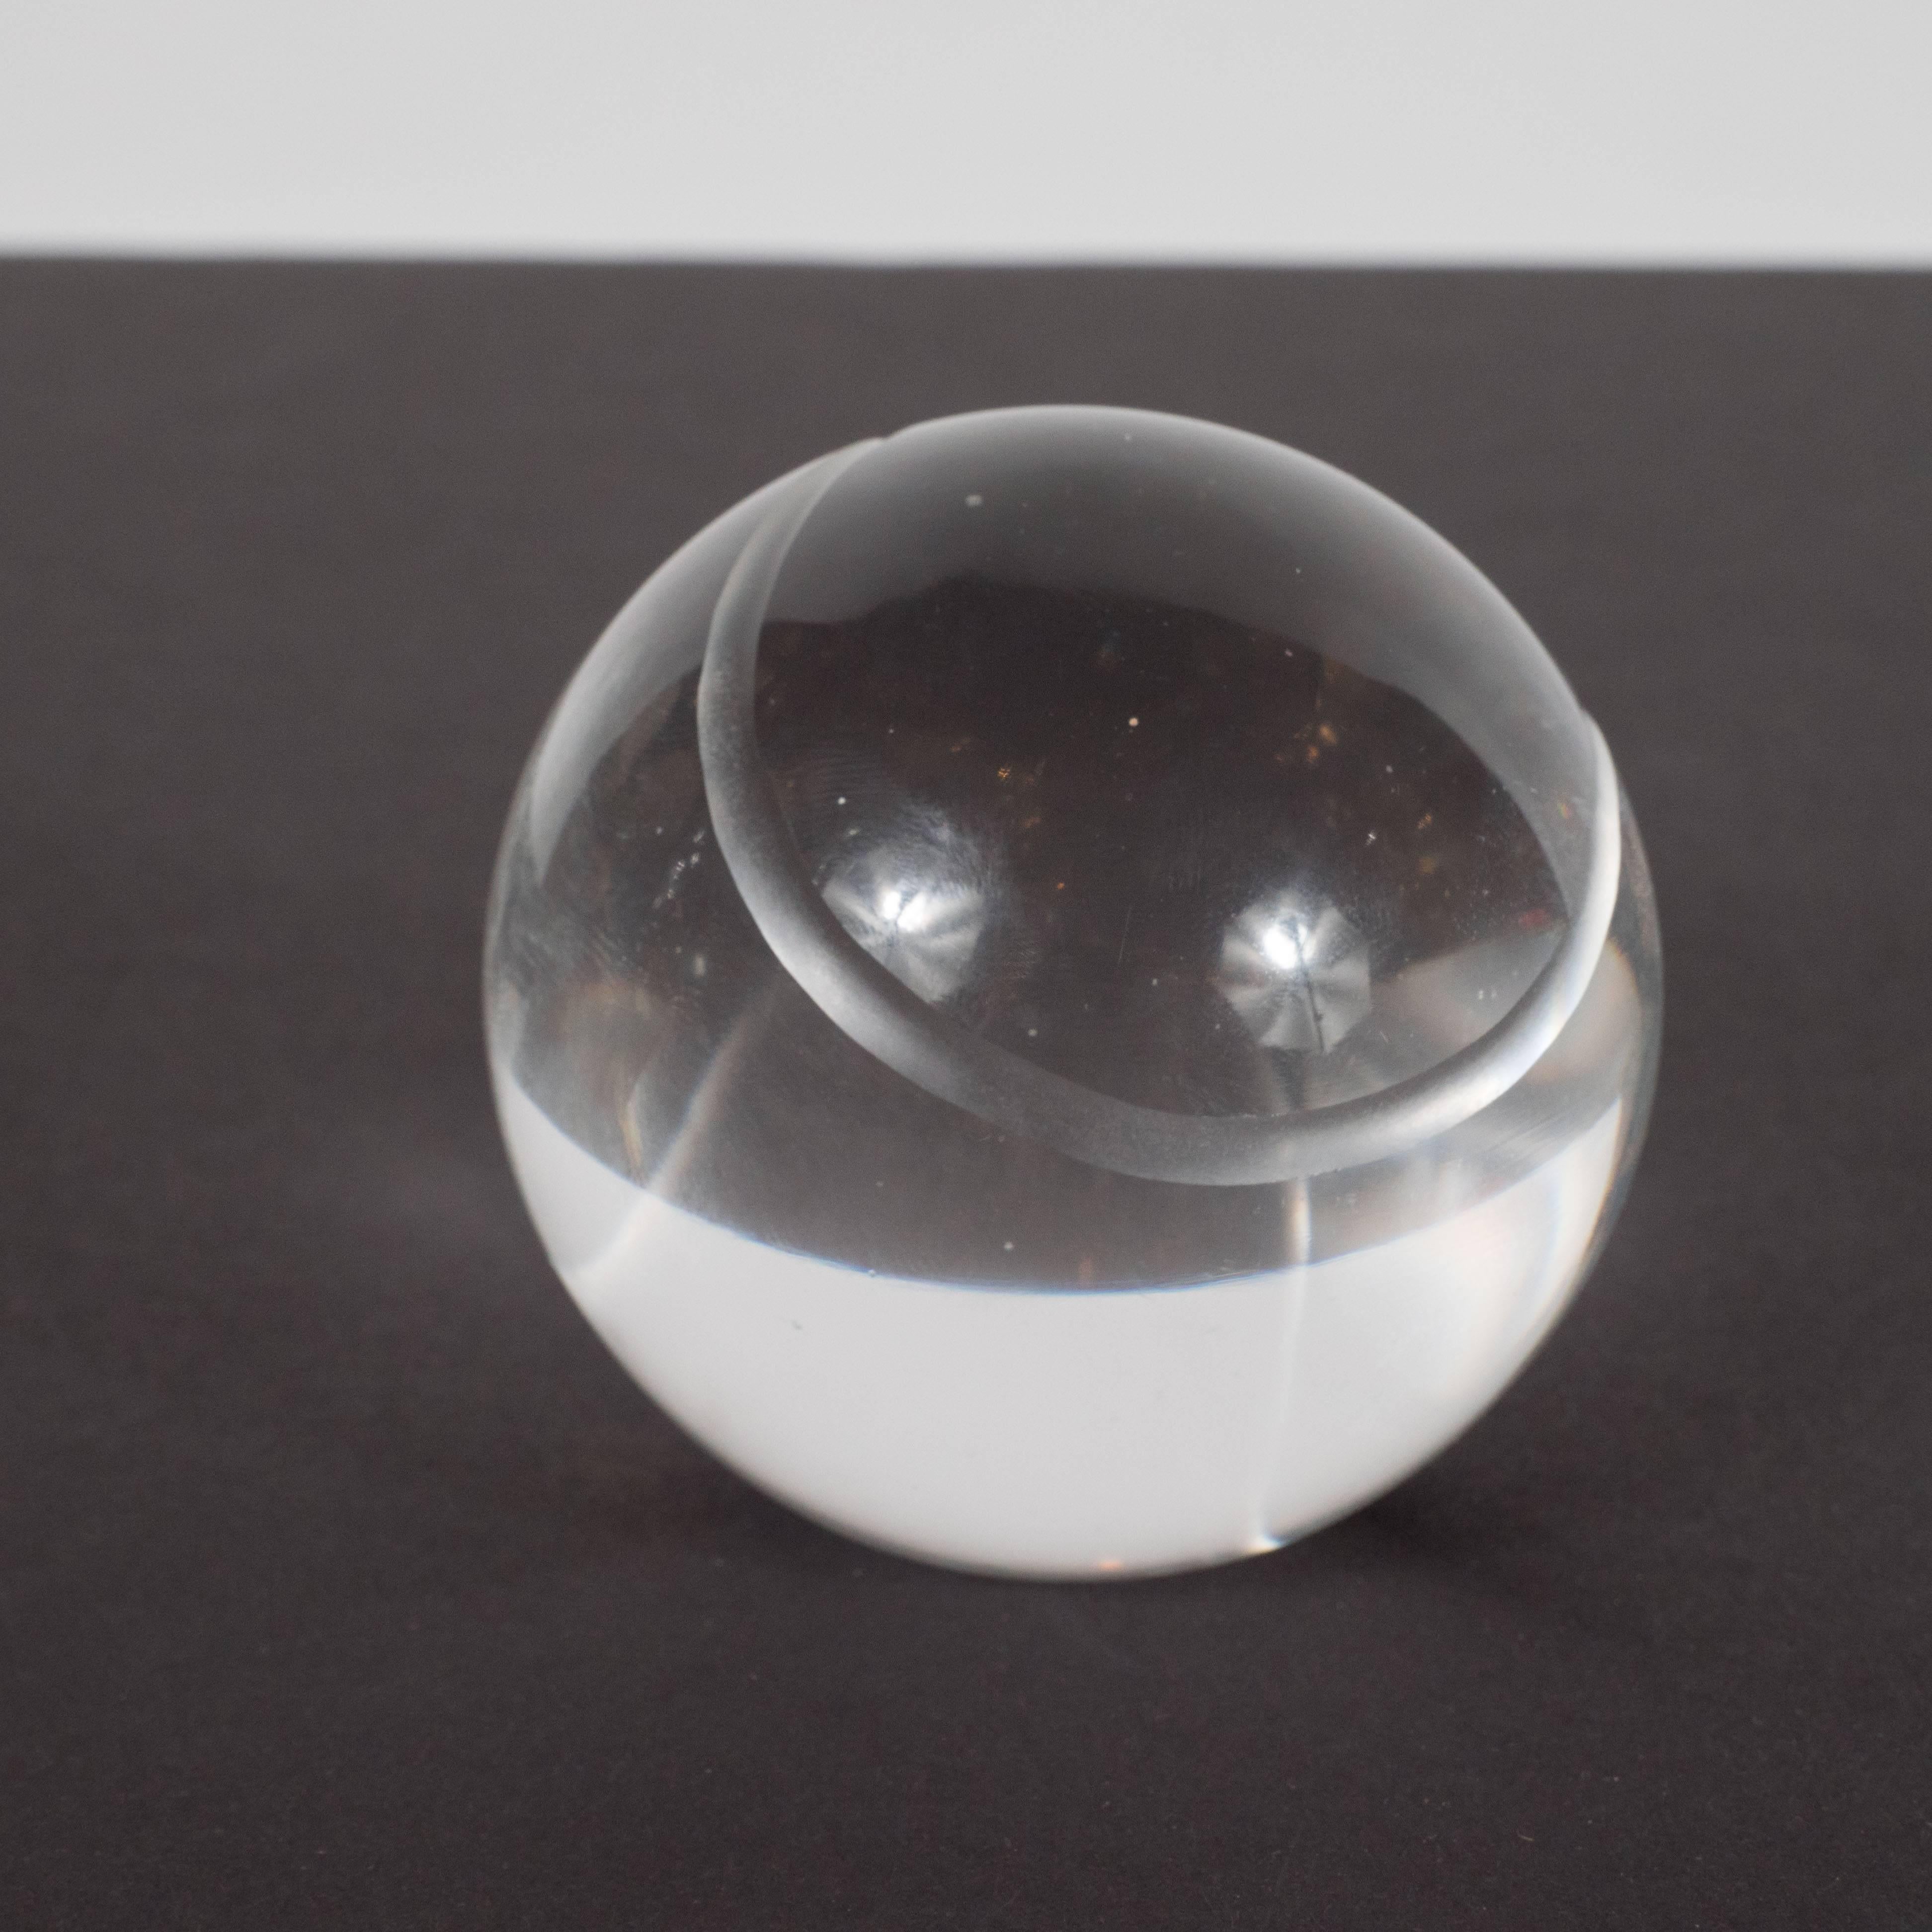 This refined Mid-Century Modern baseball paperweight- executed in translucent crystal- represents the simple elegance of Tiffany & Co. at its finest. Since its founding in 1837, Tiffany has produced among the highest quality luxury items- especially